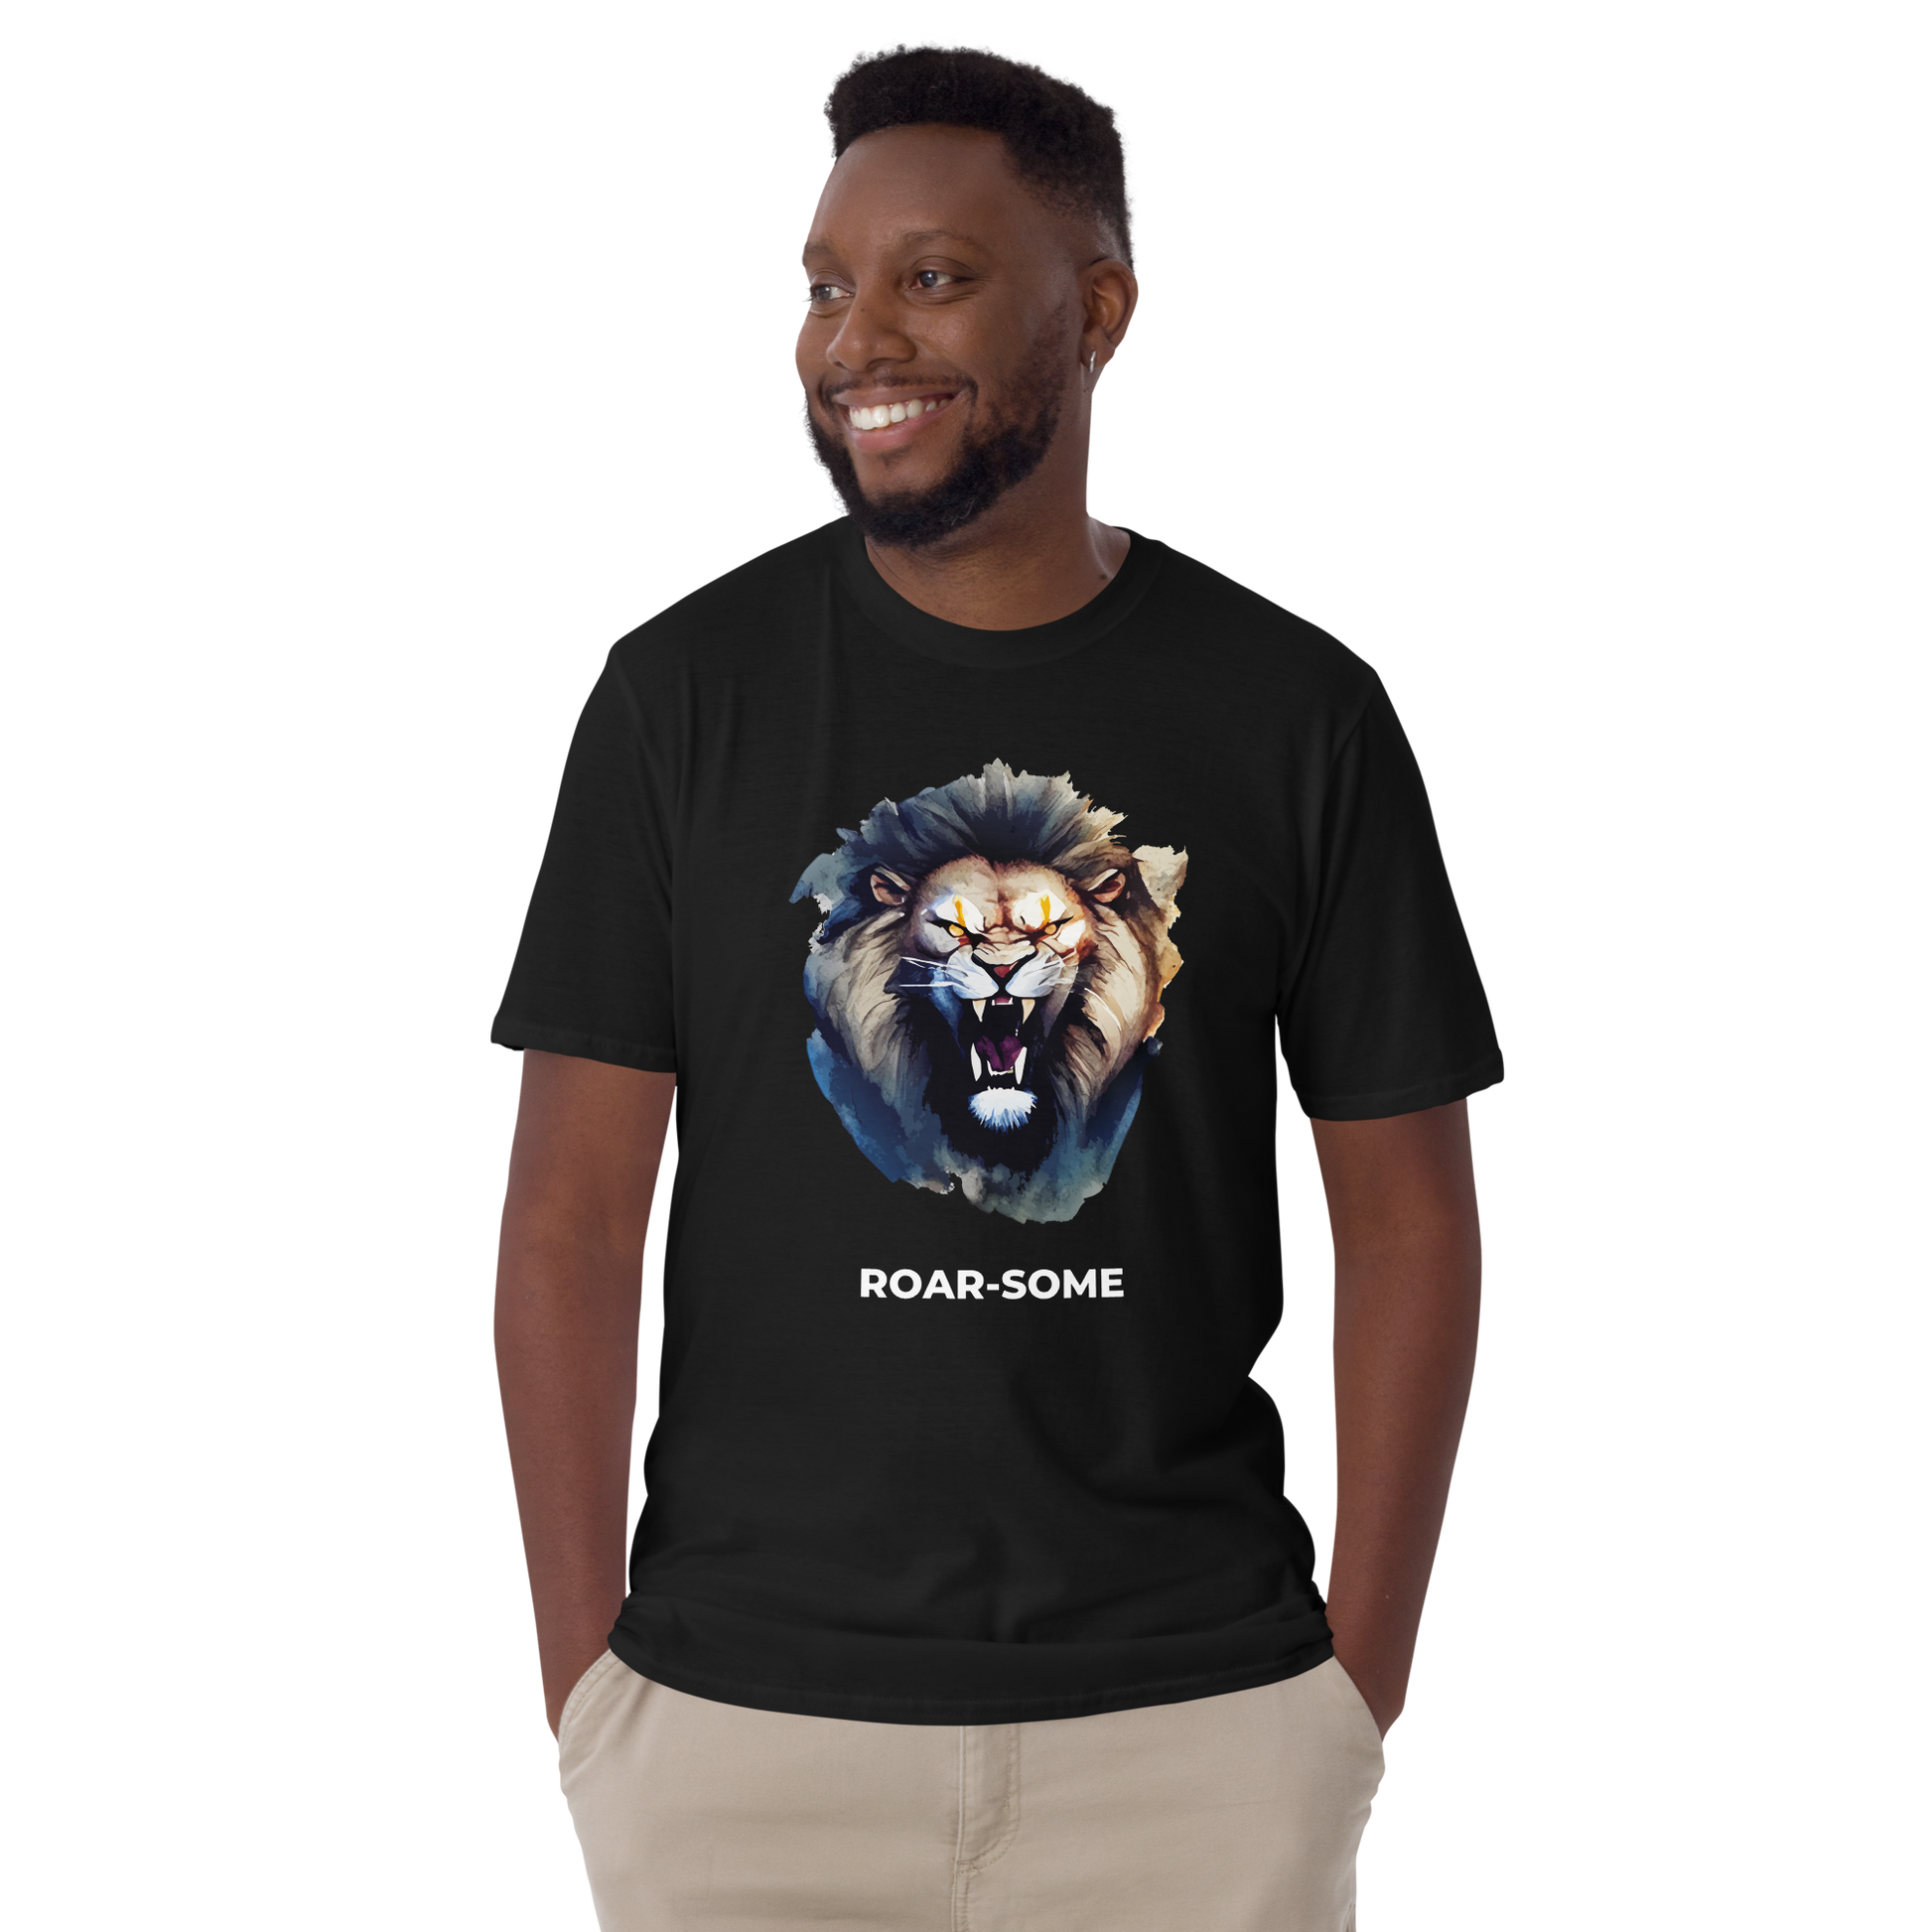 Smiling man wearing a Black Lion T-Shirt featuring a Roar-Some graphic on the chest - Cool Graphic Lion T-Shirts - Boozy Fox